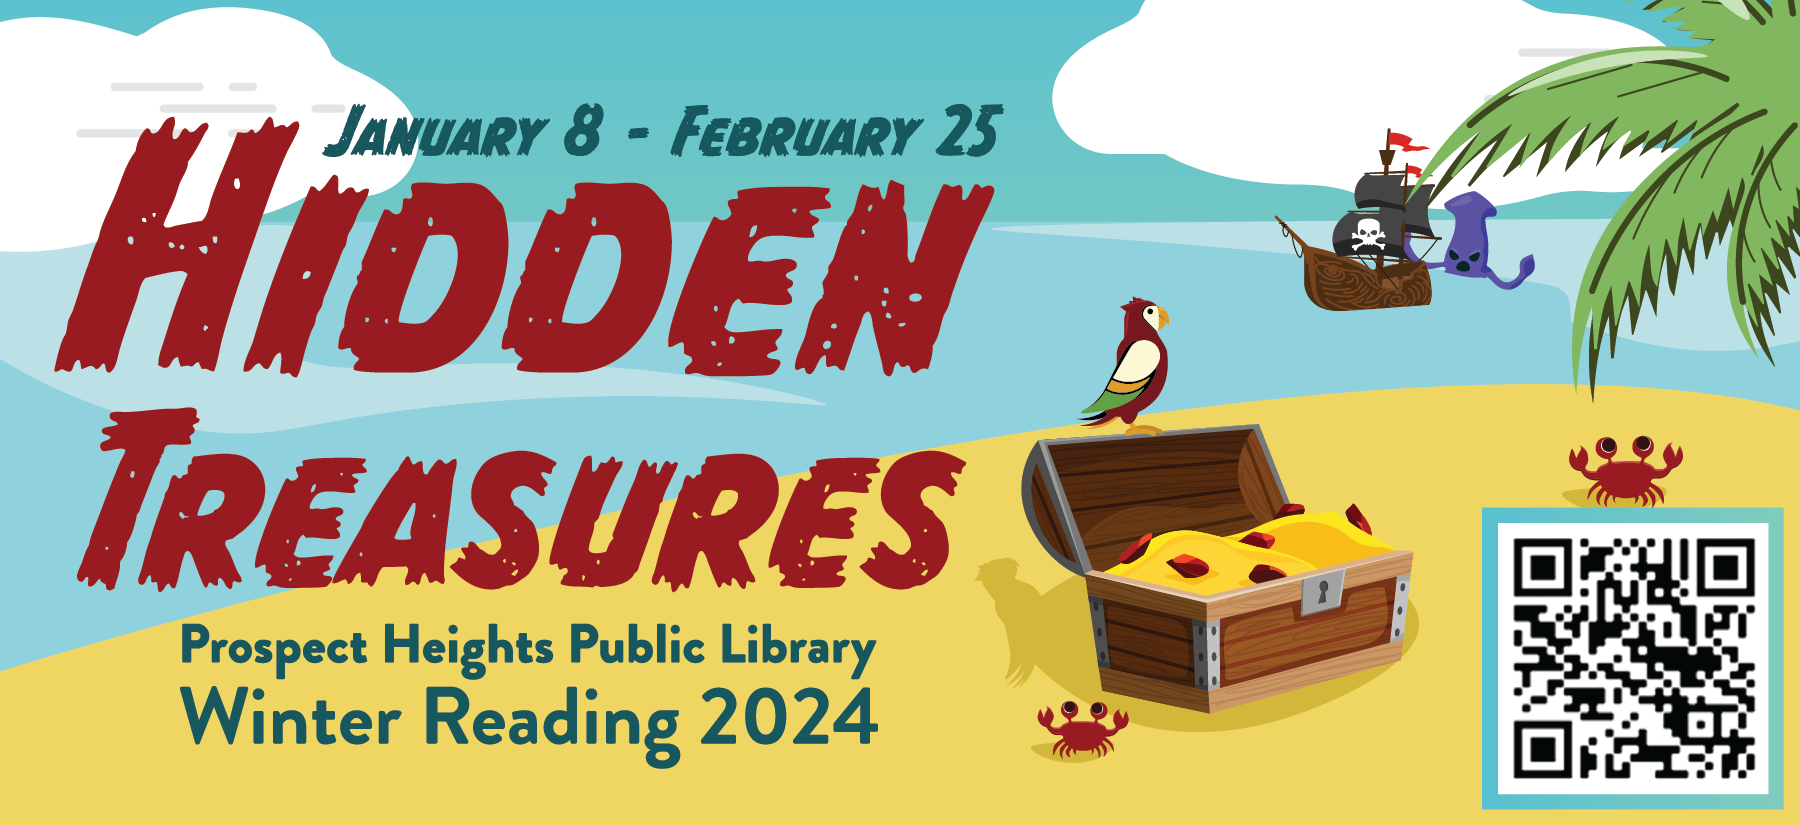 phpl, Prospect Heights Public Library, Hidden Treasures Winter Reading, Youth, Teen